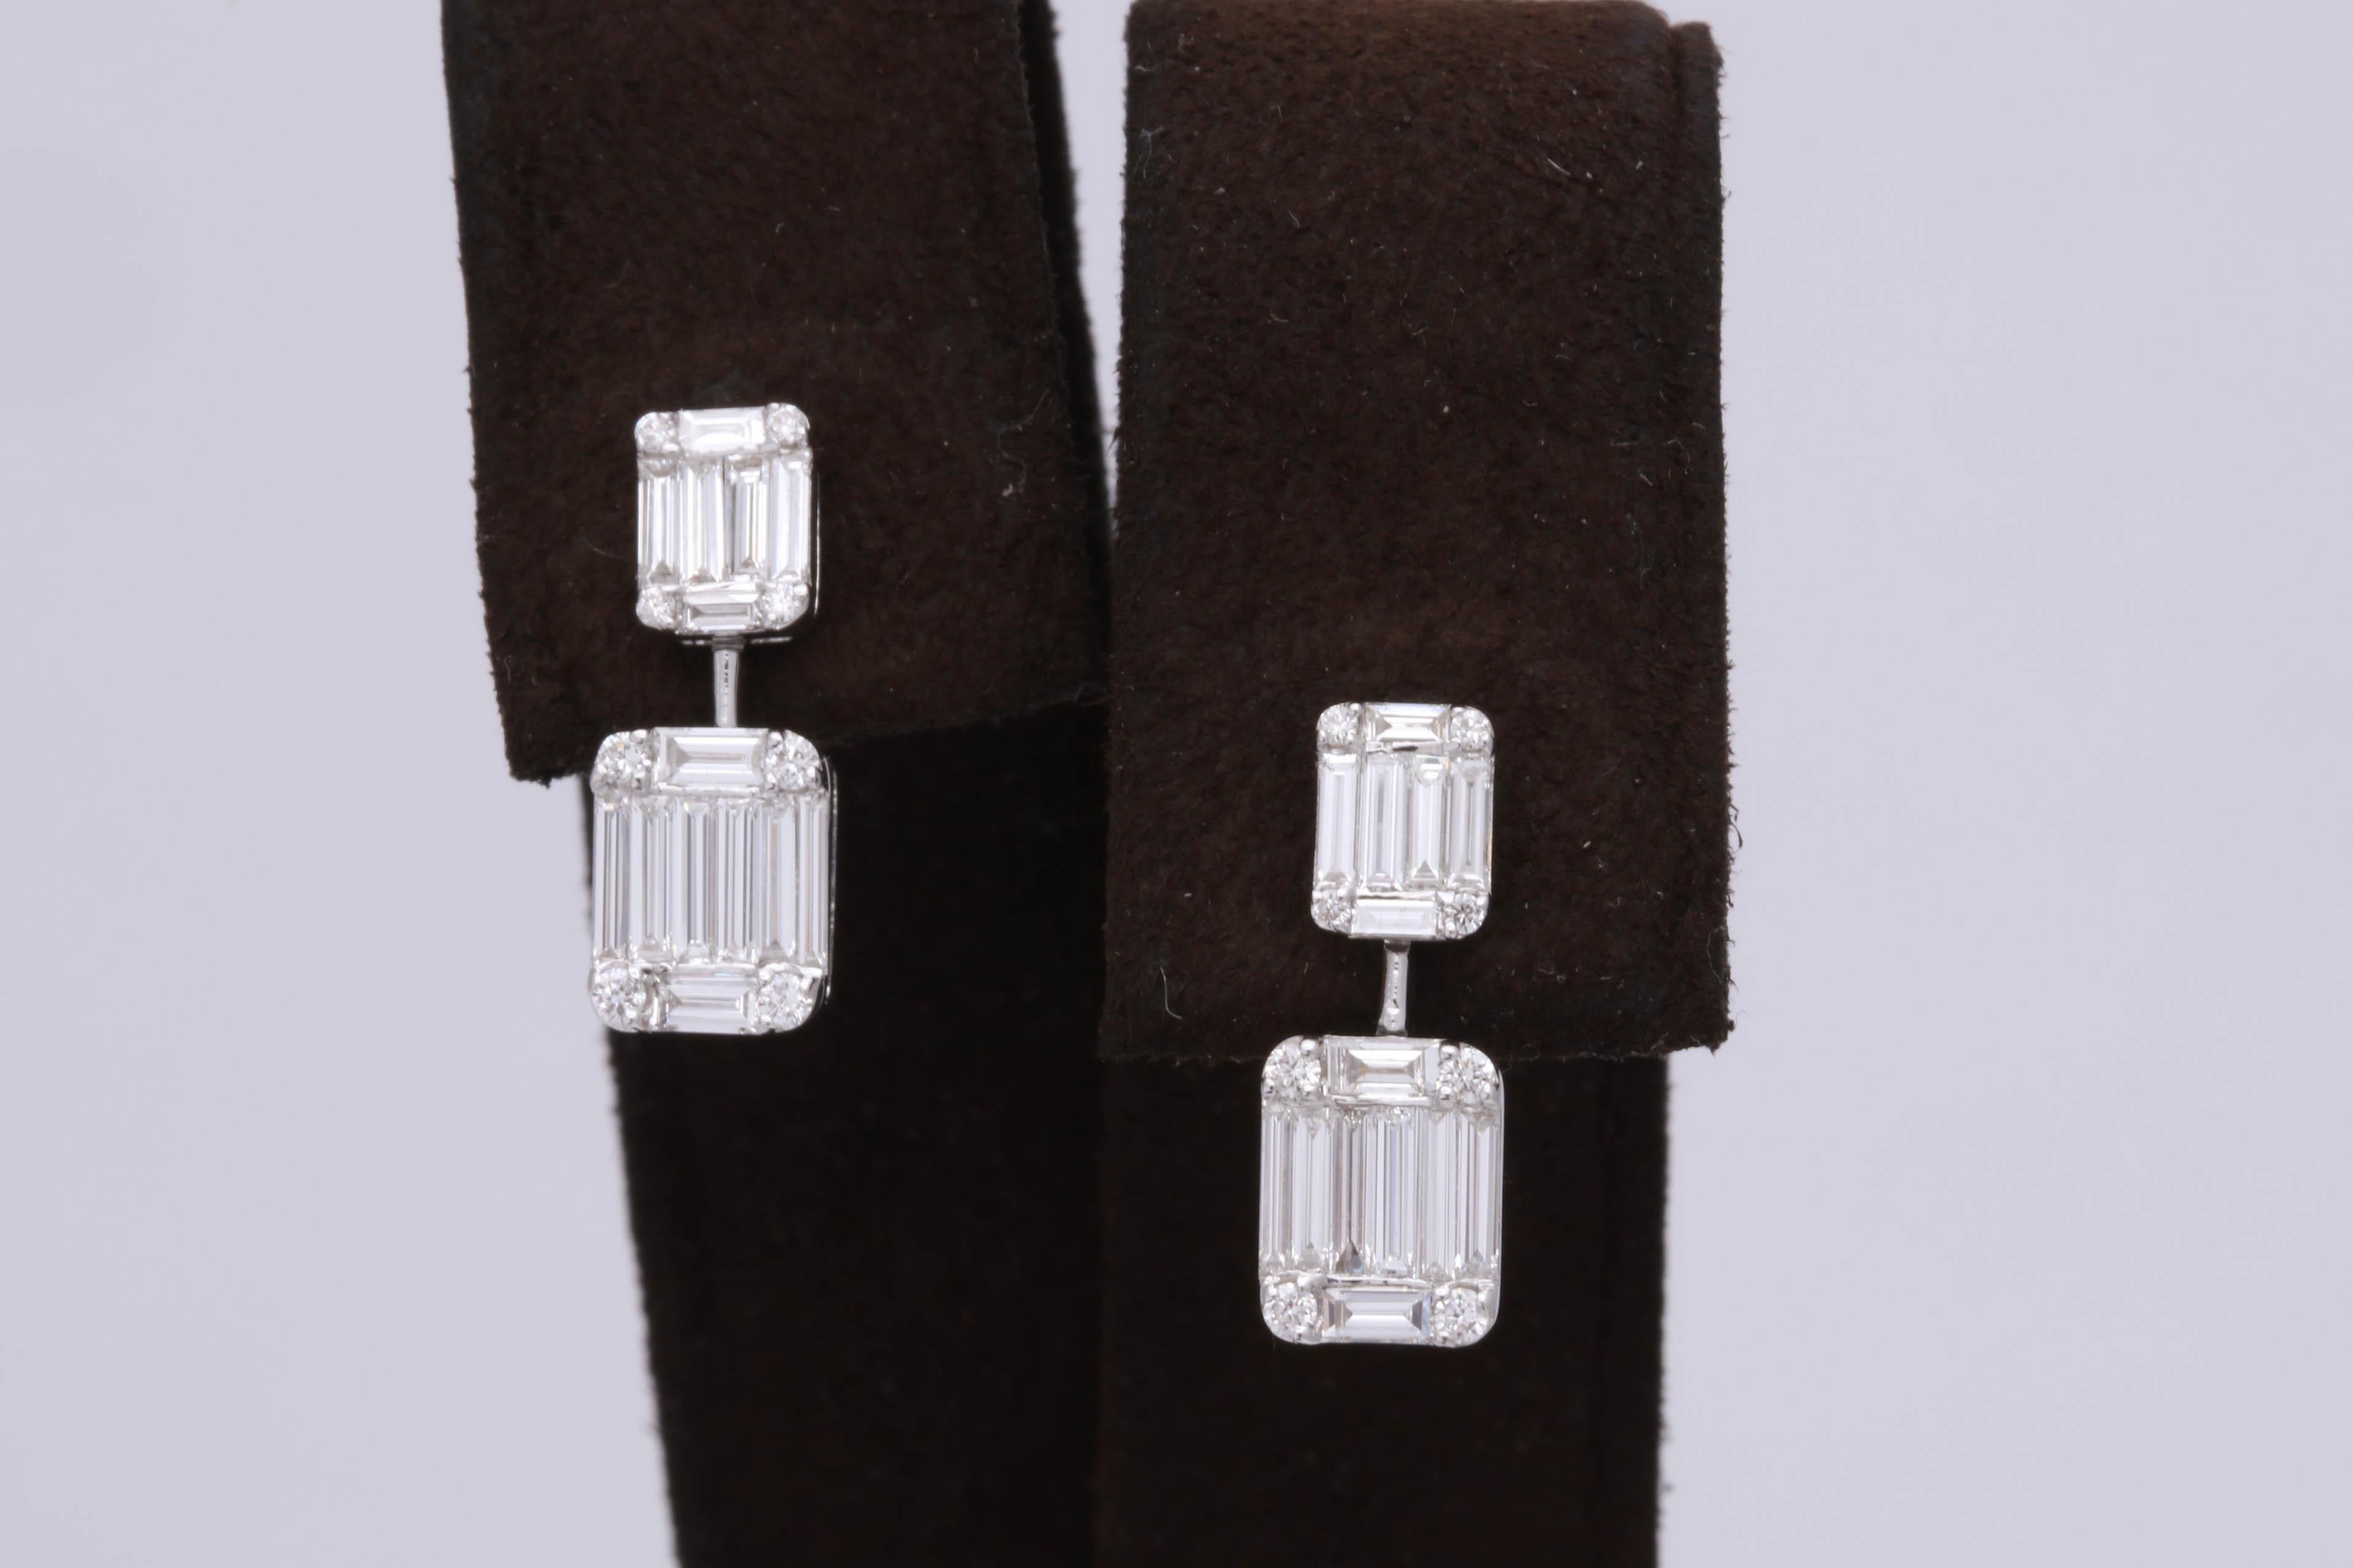 
An AMAZING earring!

1.37 carats of round and special cut F color VS clarity diamonds give an illusion Emerald cut diamond look.  Set in 18k white gold.

The combination of the different cuts give these earrings a special sparkle.

A wonderful gift